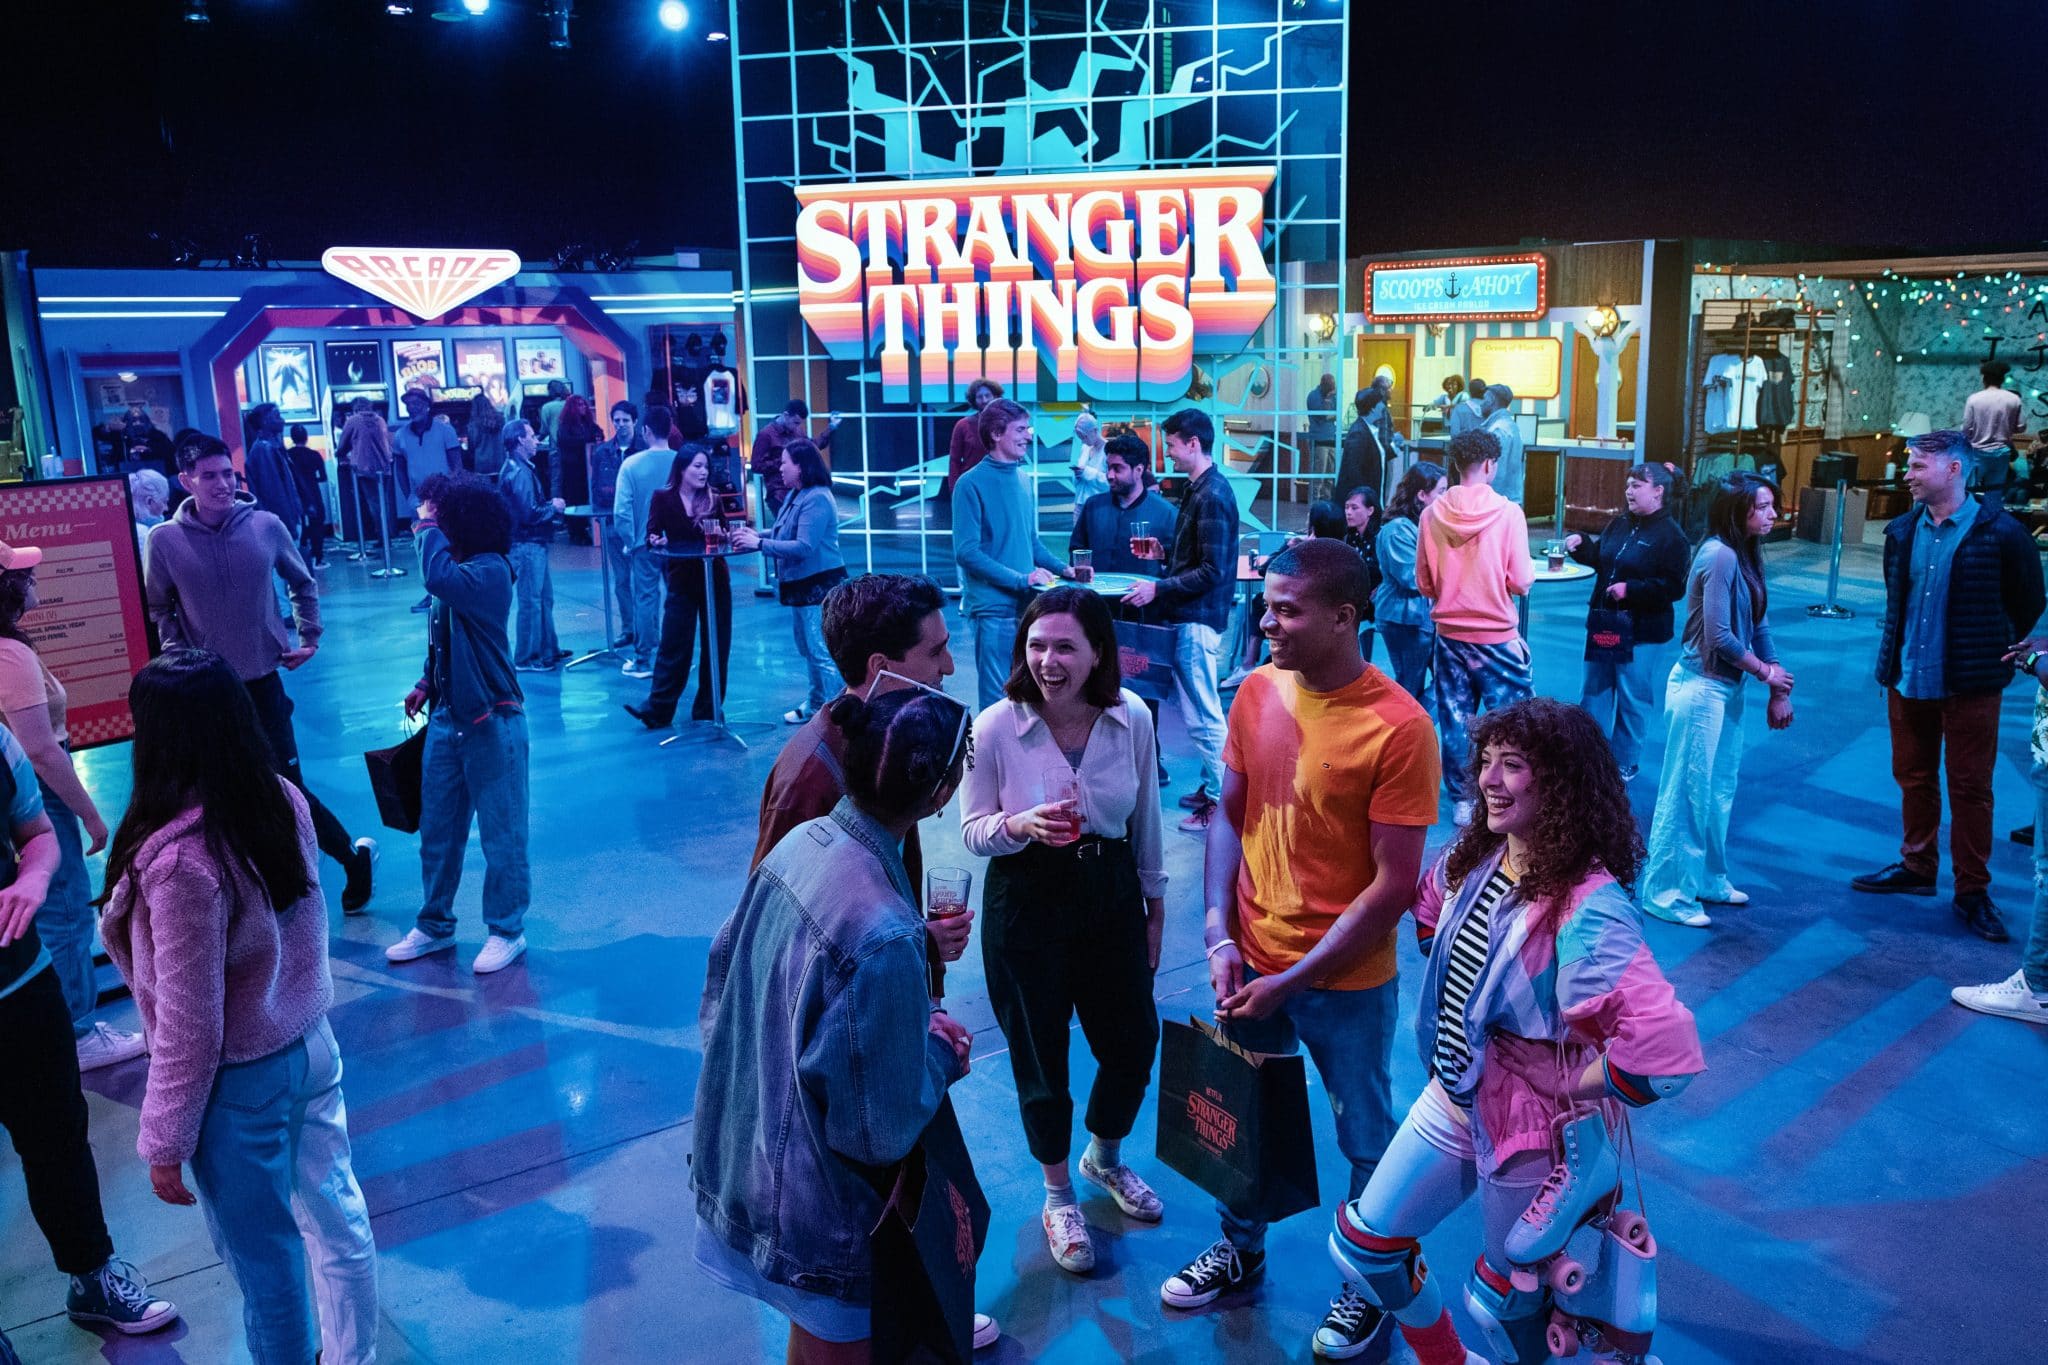 Stranger Things Experience's Mix-Tape area, with a large glowing Stranger Things logo and people walking around, chatting, and enjoying cocktails.